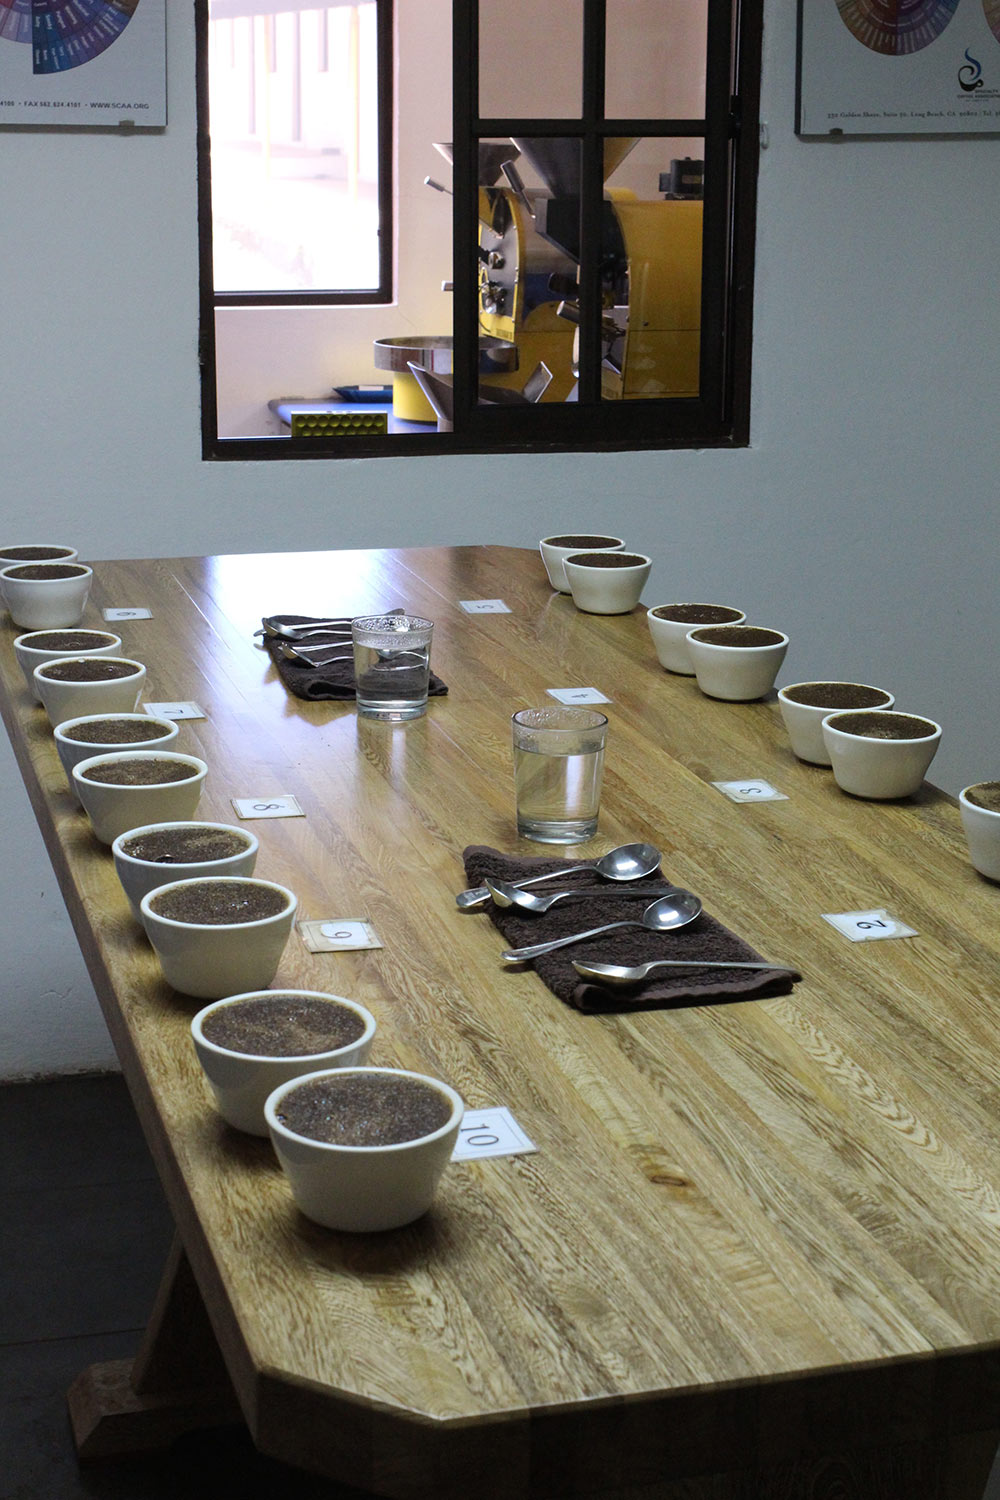 A table full of samples from the mills El Manzano processes.